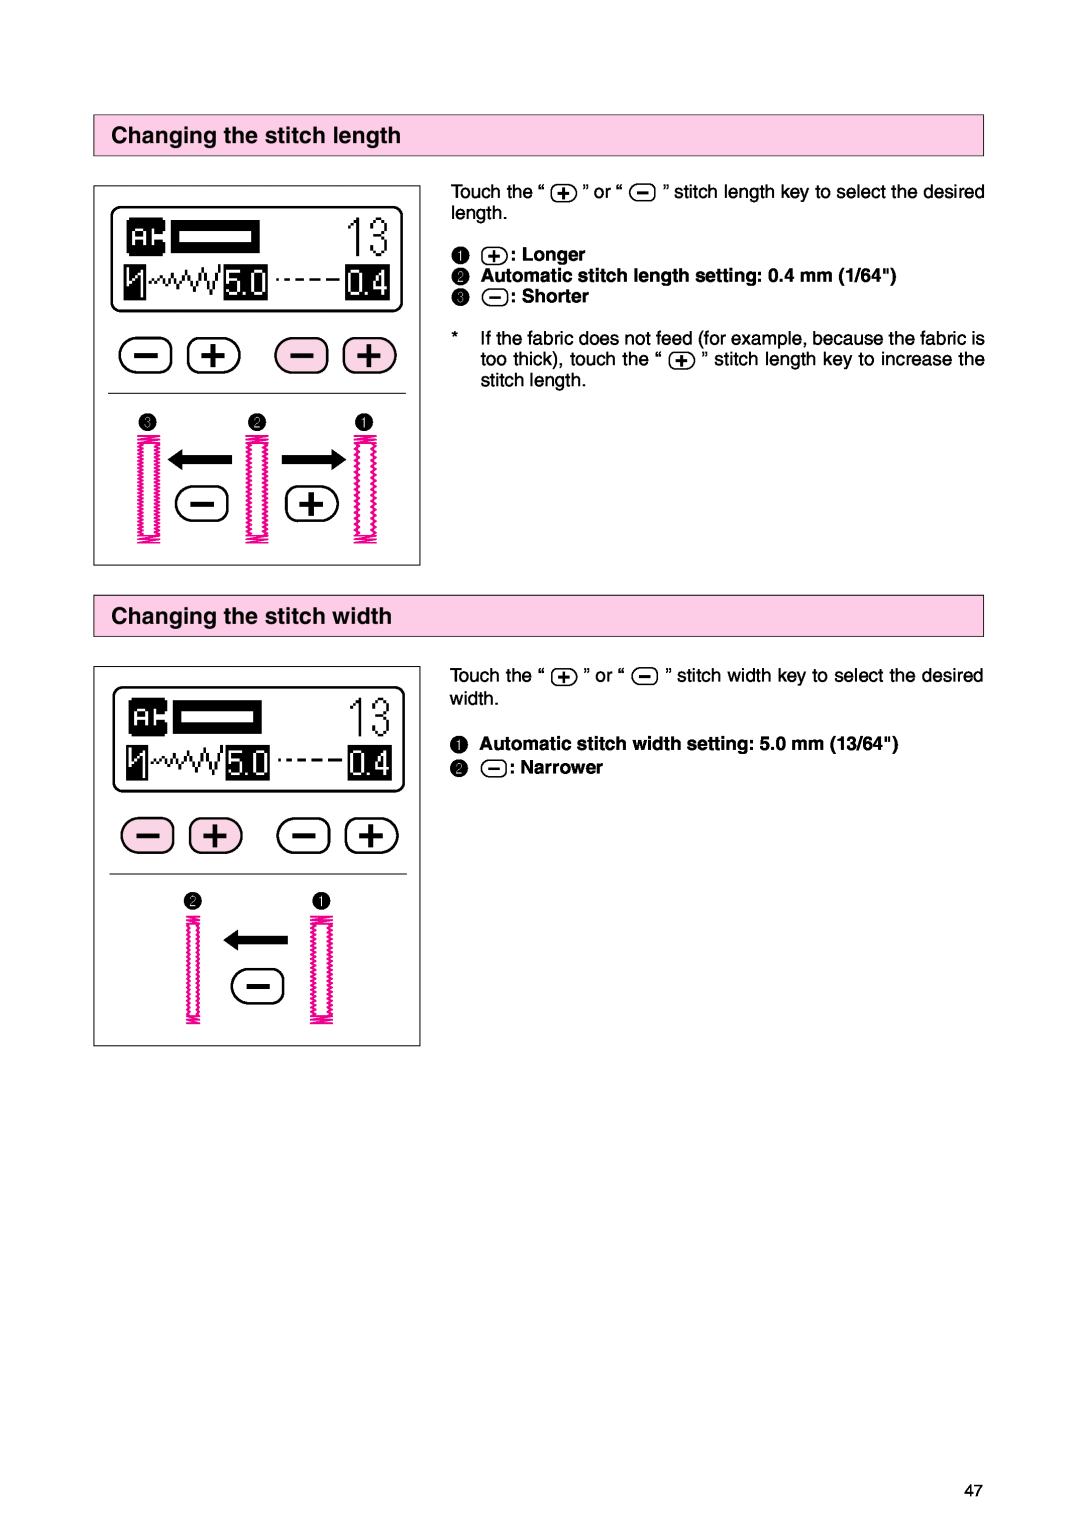 Brother PC 3000 operation manual Changing the stitch width, Longer 2 Automatic stitch length setting 0.4 mm 1/64 3 Shorter 